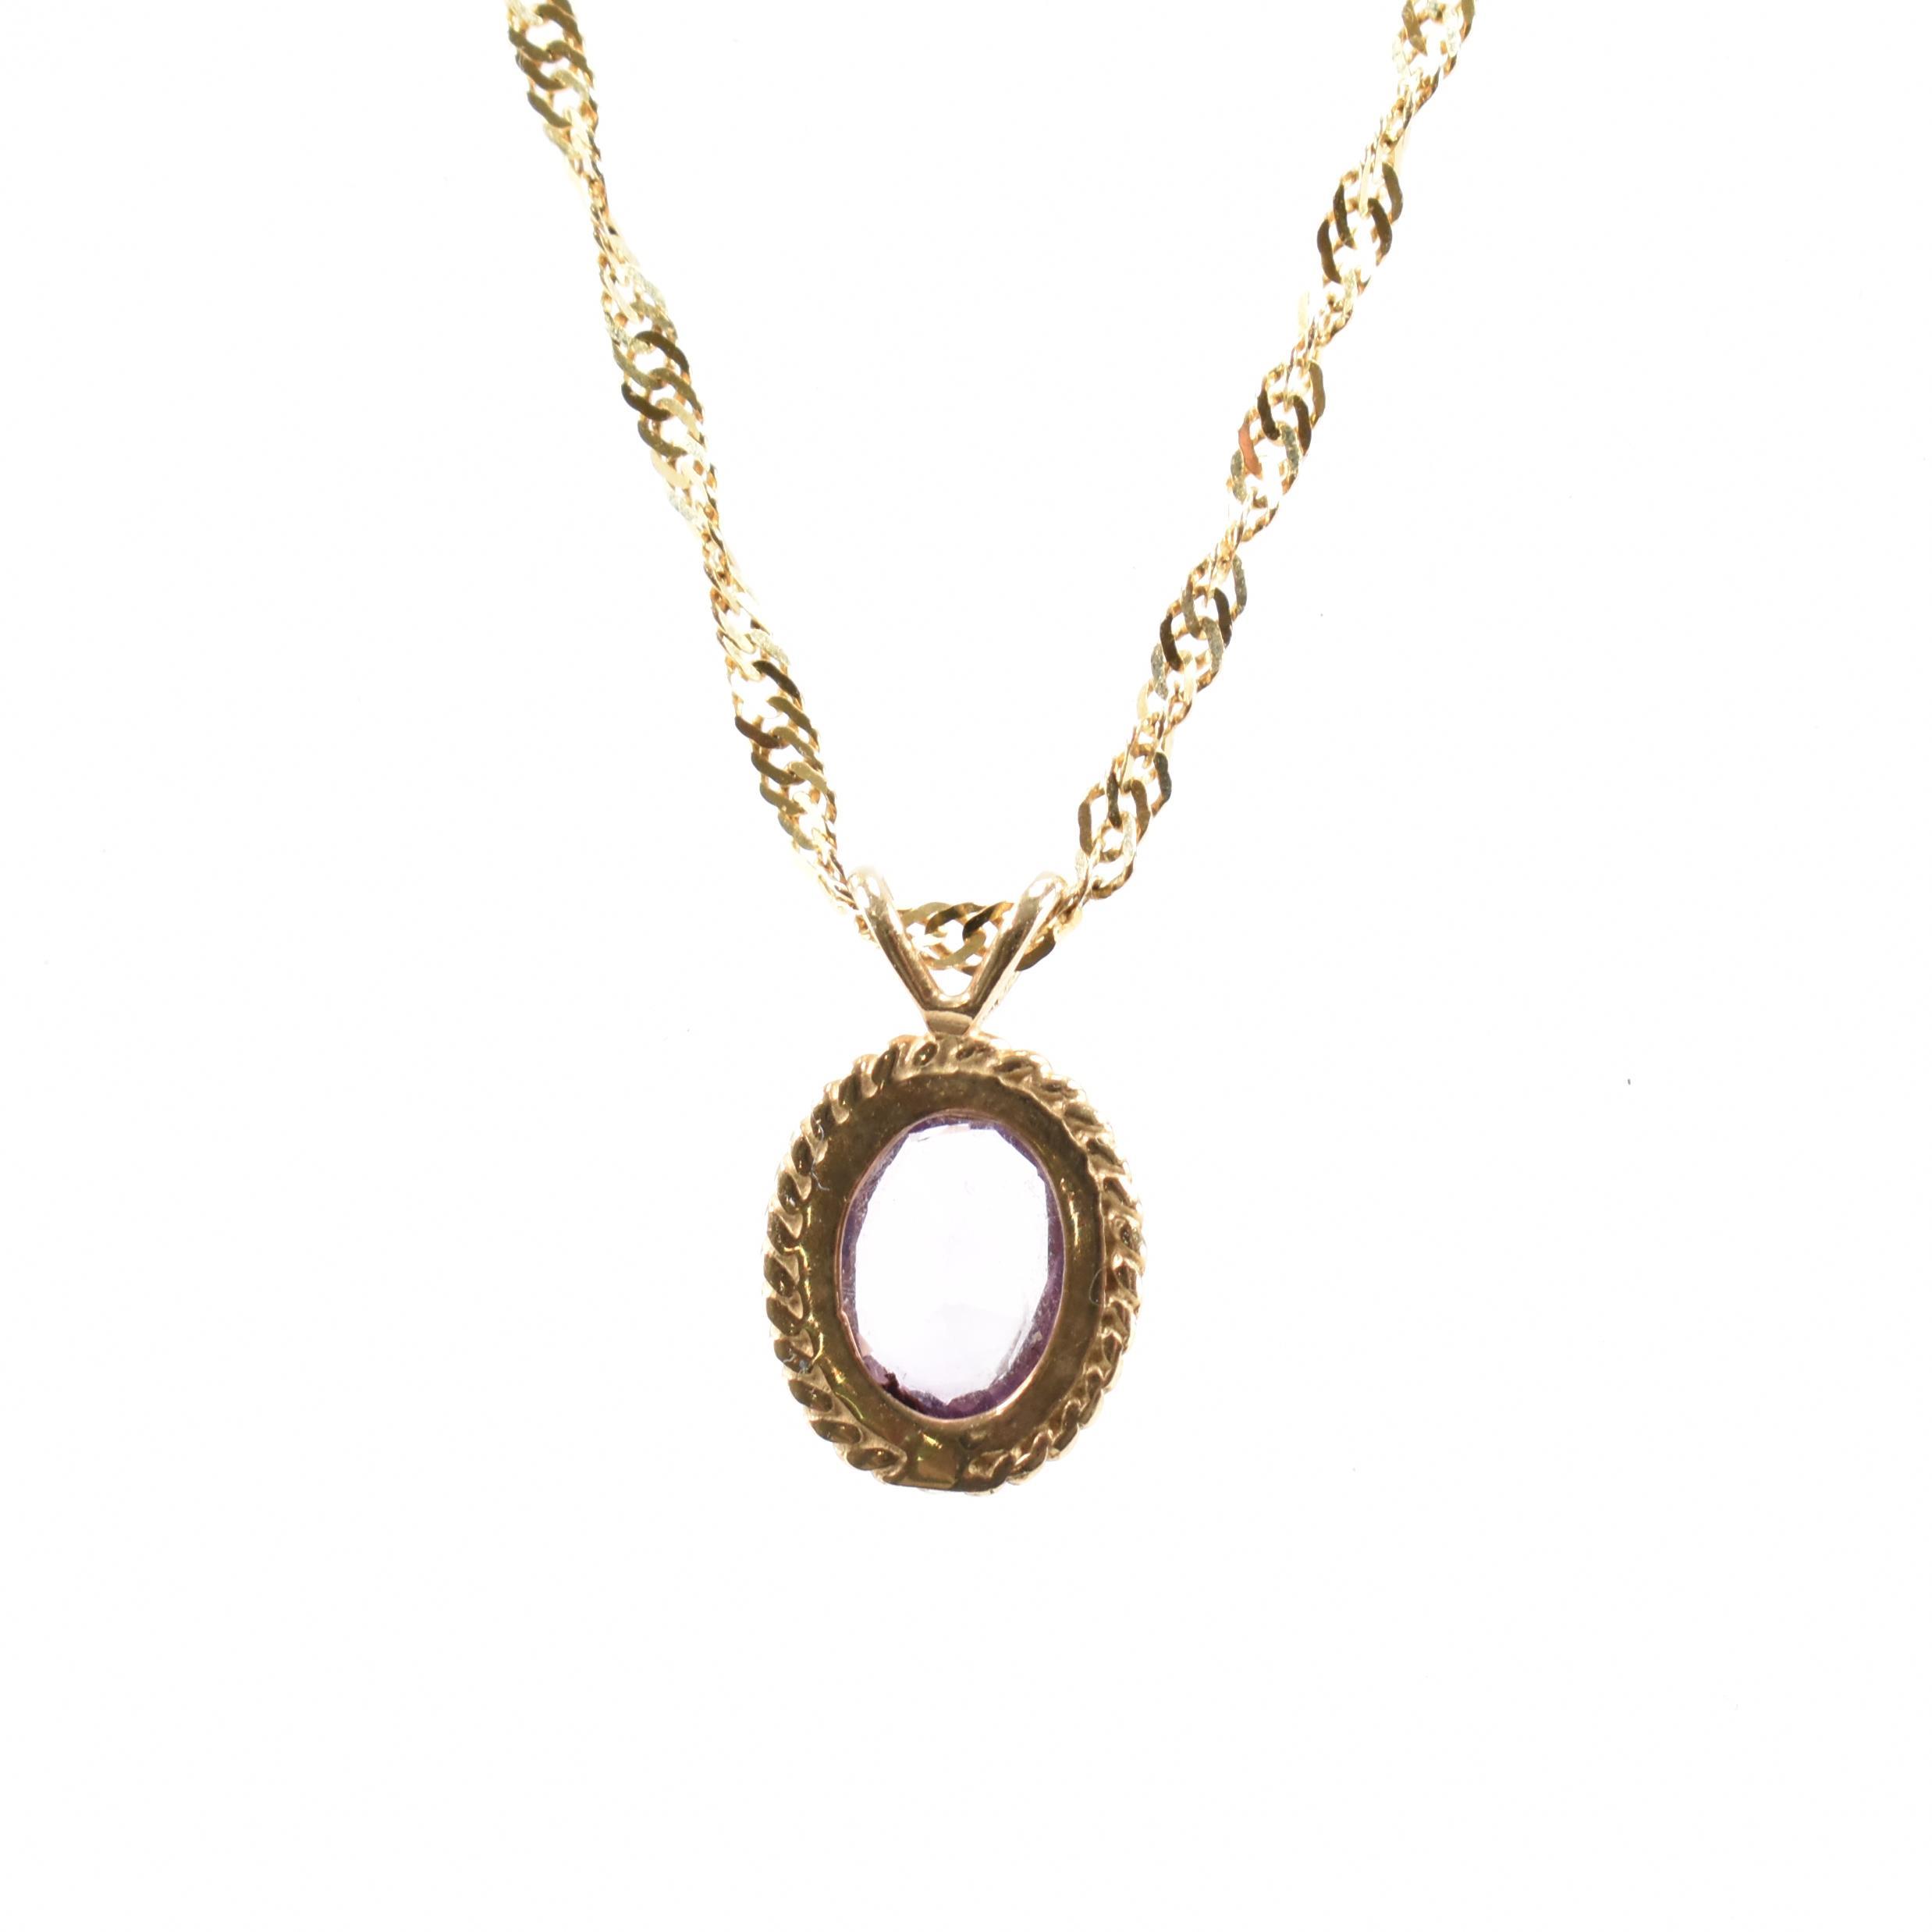 HALLMARKED 9CT GOLD & AMETHYST PENDANT NECKLACE - Image 3 of 4